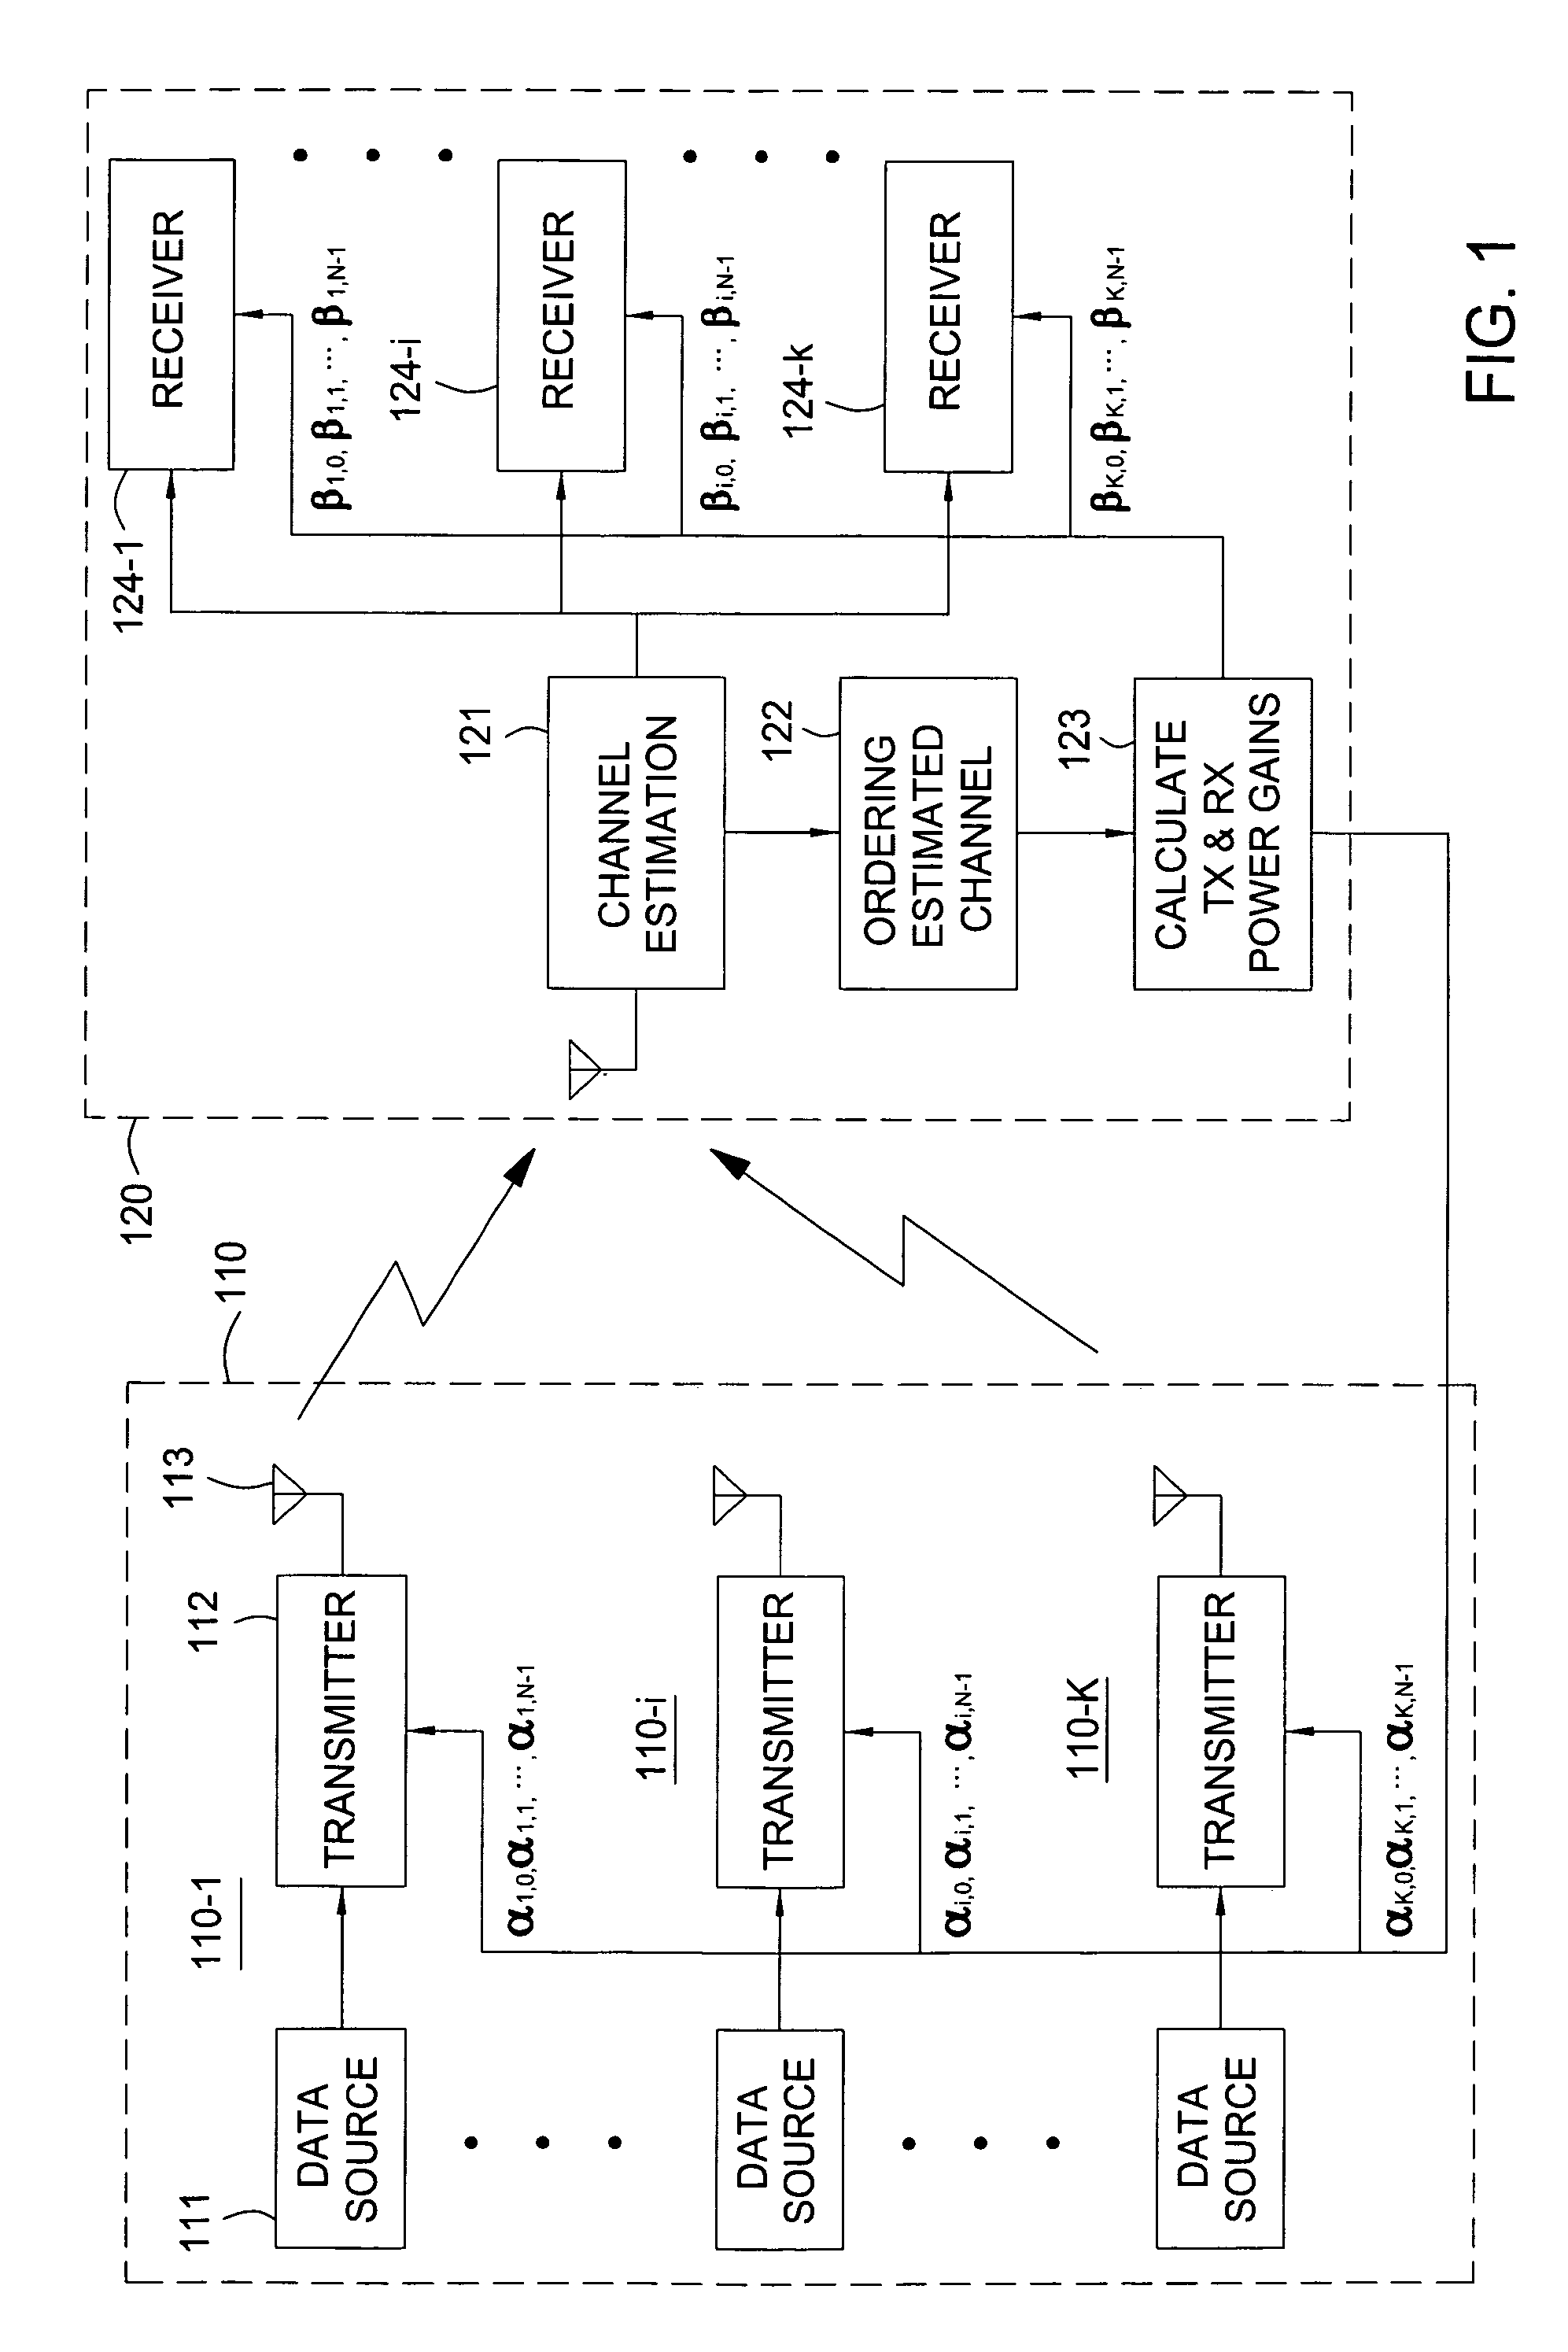 Combined frequency-time domain power adaptation for CDMA communication systems